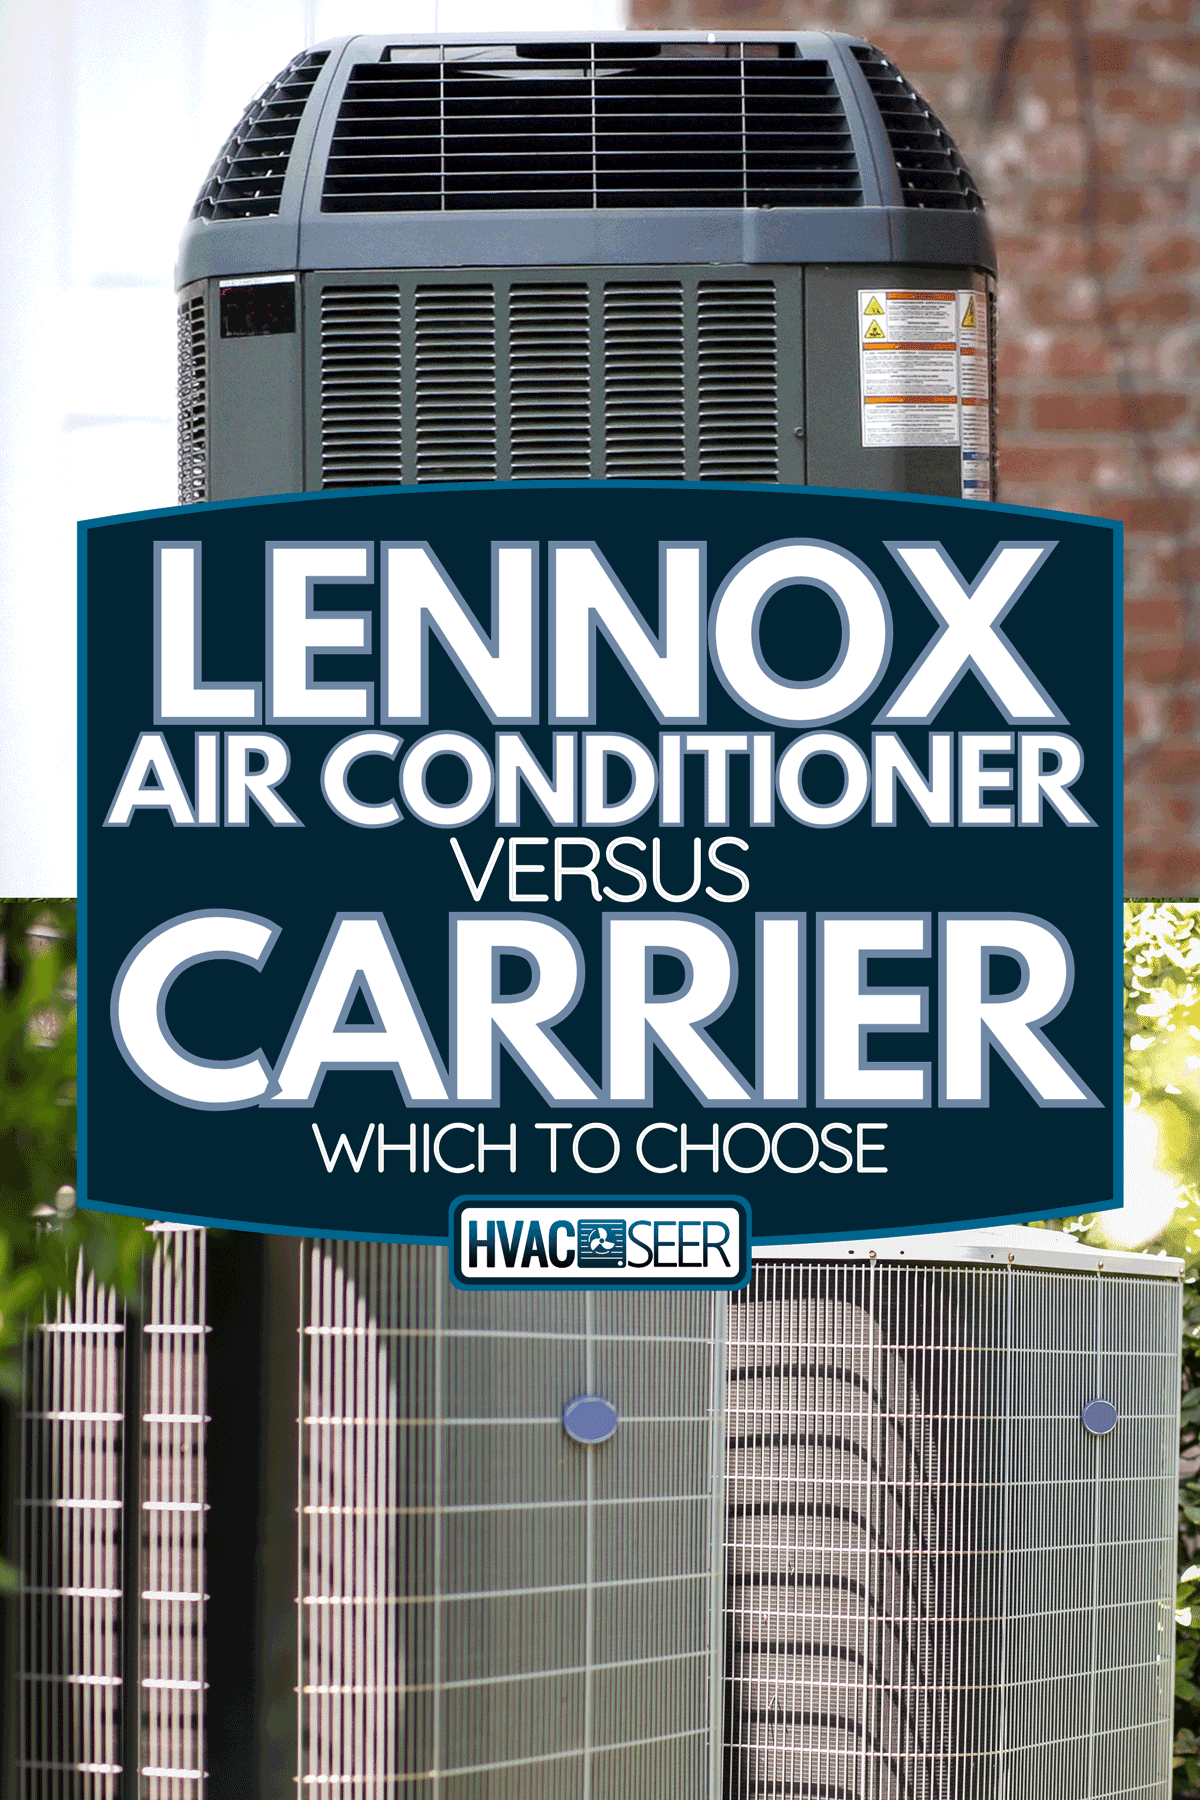 Comparison between a lennox and a carrier air conditioner, Lennox Air Conditioner Vs. Carrier: Which To Choose